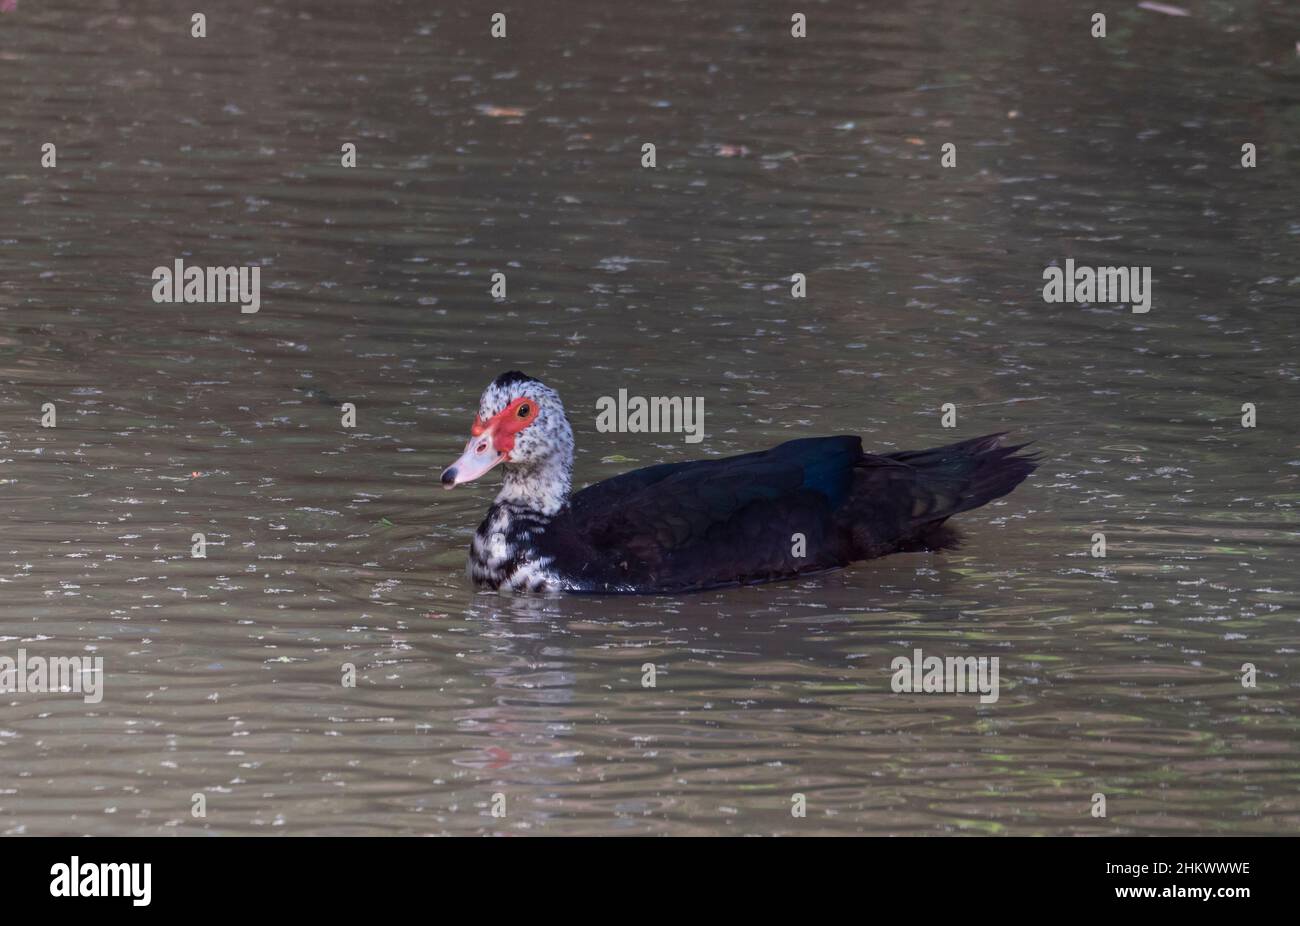 A Muscovy duck, Cairina moschata, native to Mexico and North America, introduced to Australia swimming in the Nogoa River, Emerald, Queensland. Stock Photo